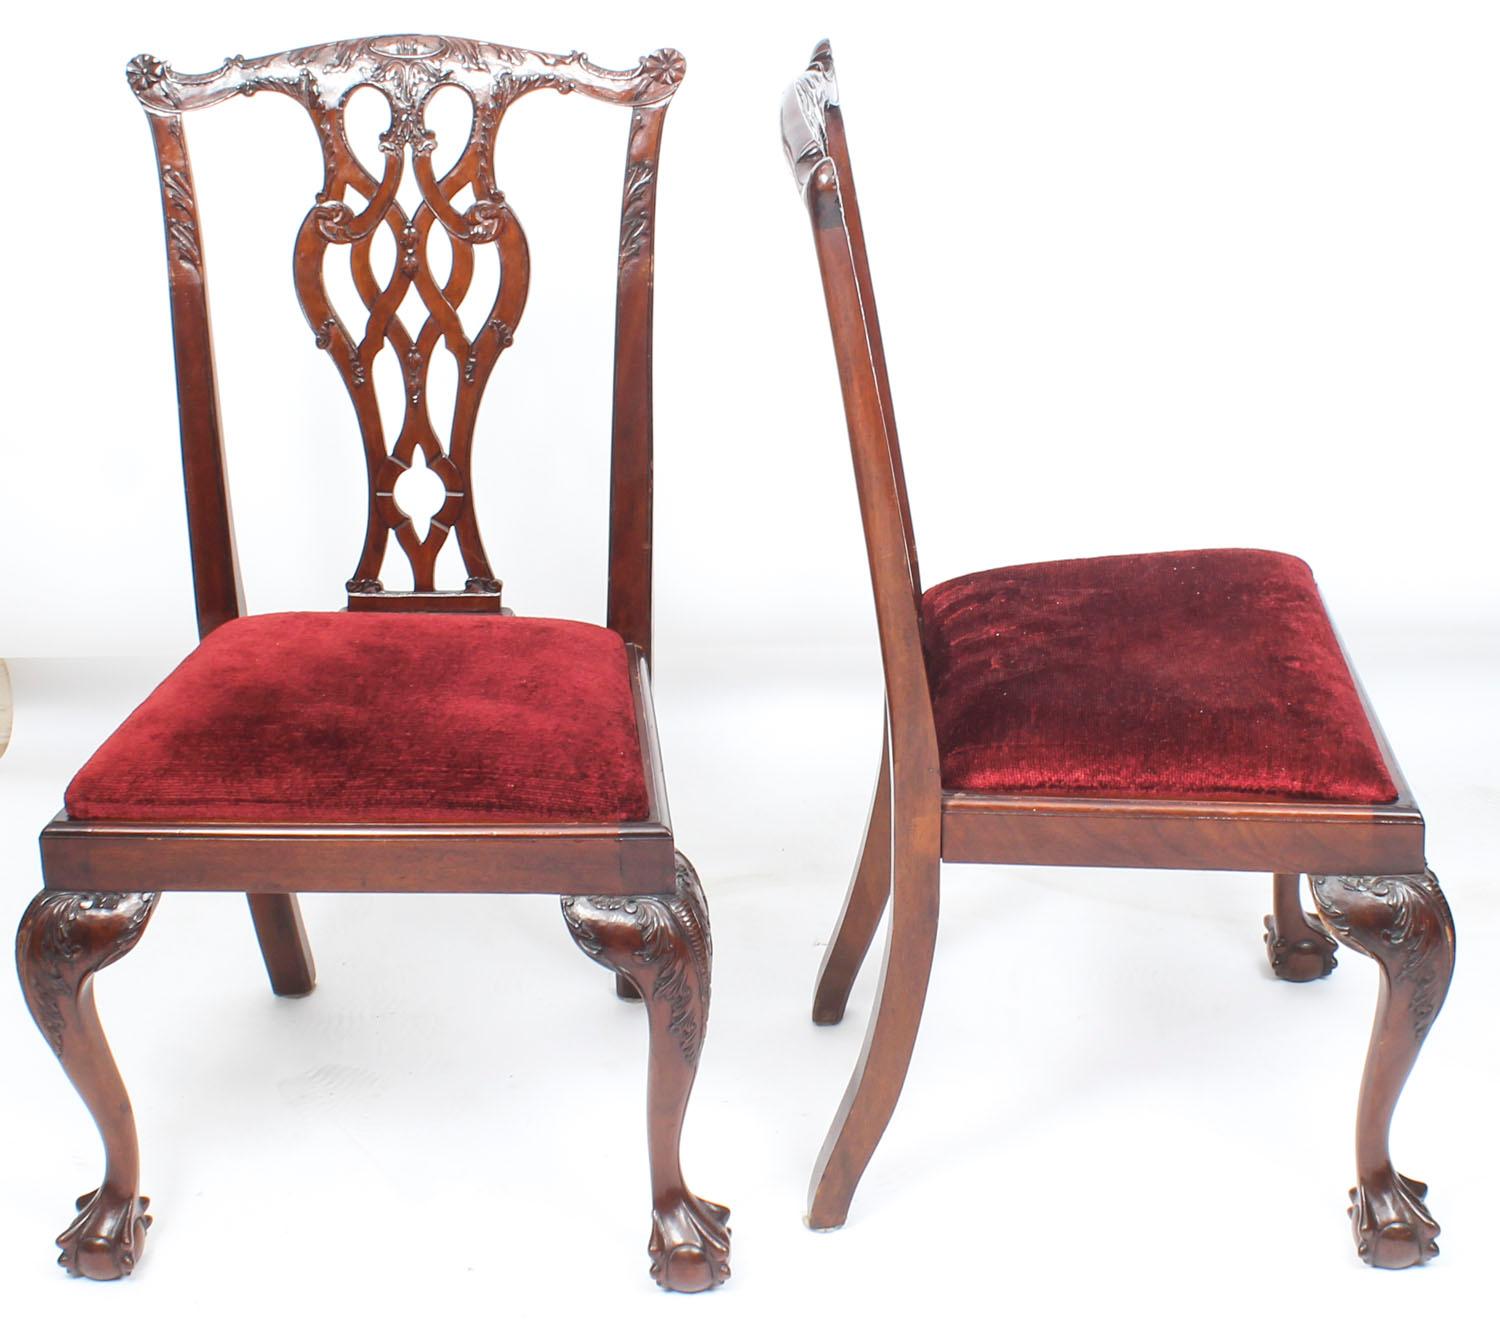 A beautiful Vintage set of ten solid mahogany Chippendale Revival dining chairs, comprising six side chairs and two armchairs, dating from the mid-20th century.

They have been crafted from hand carved solid flame mahogany with drop in seats